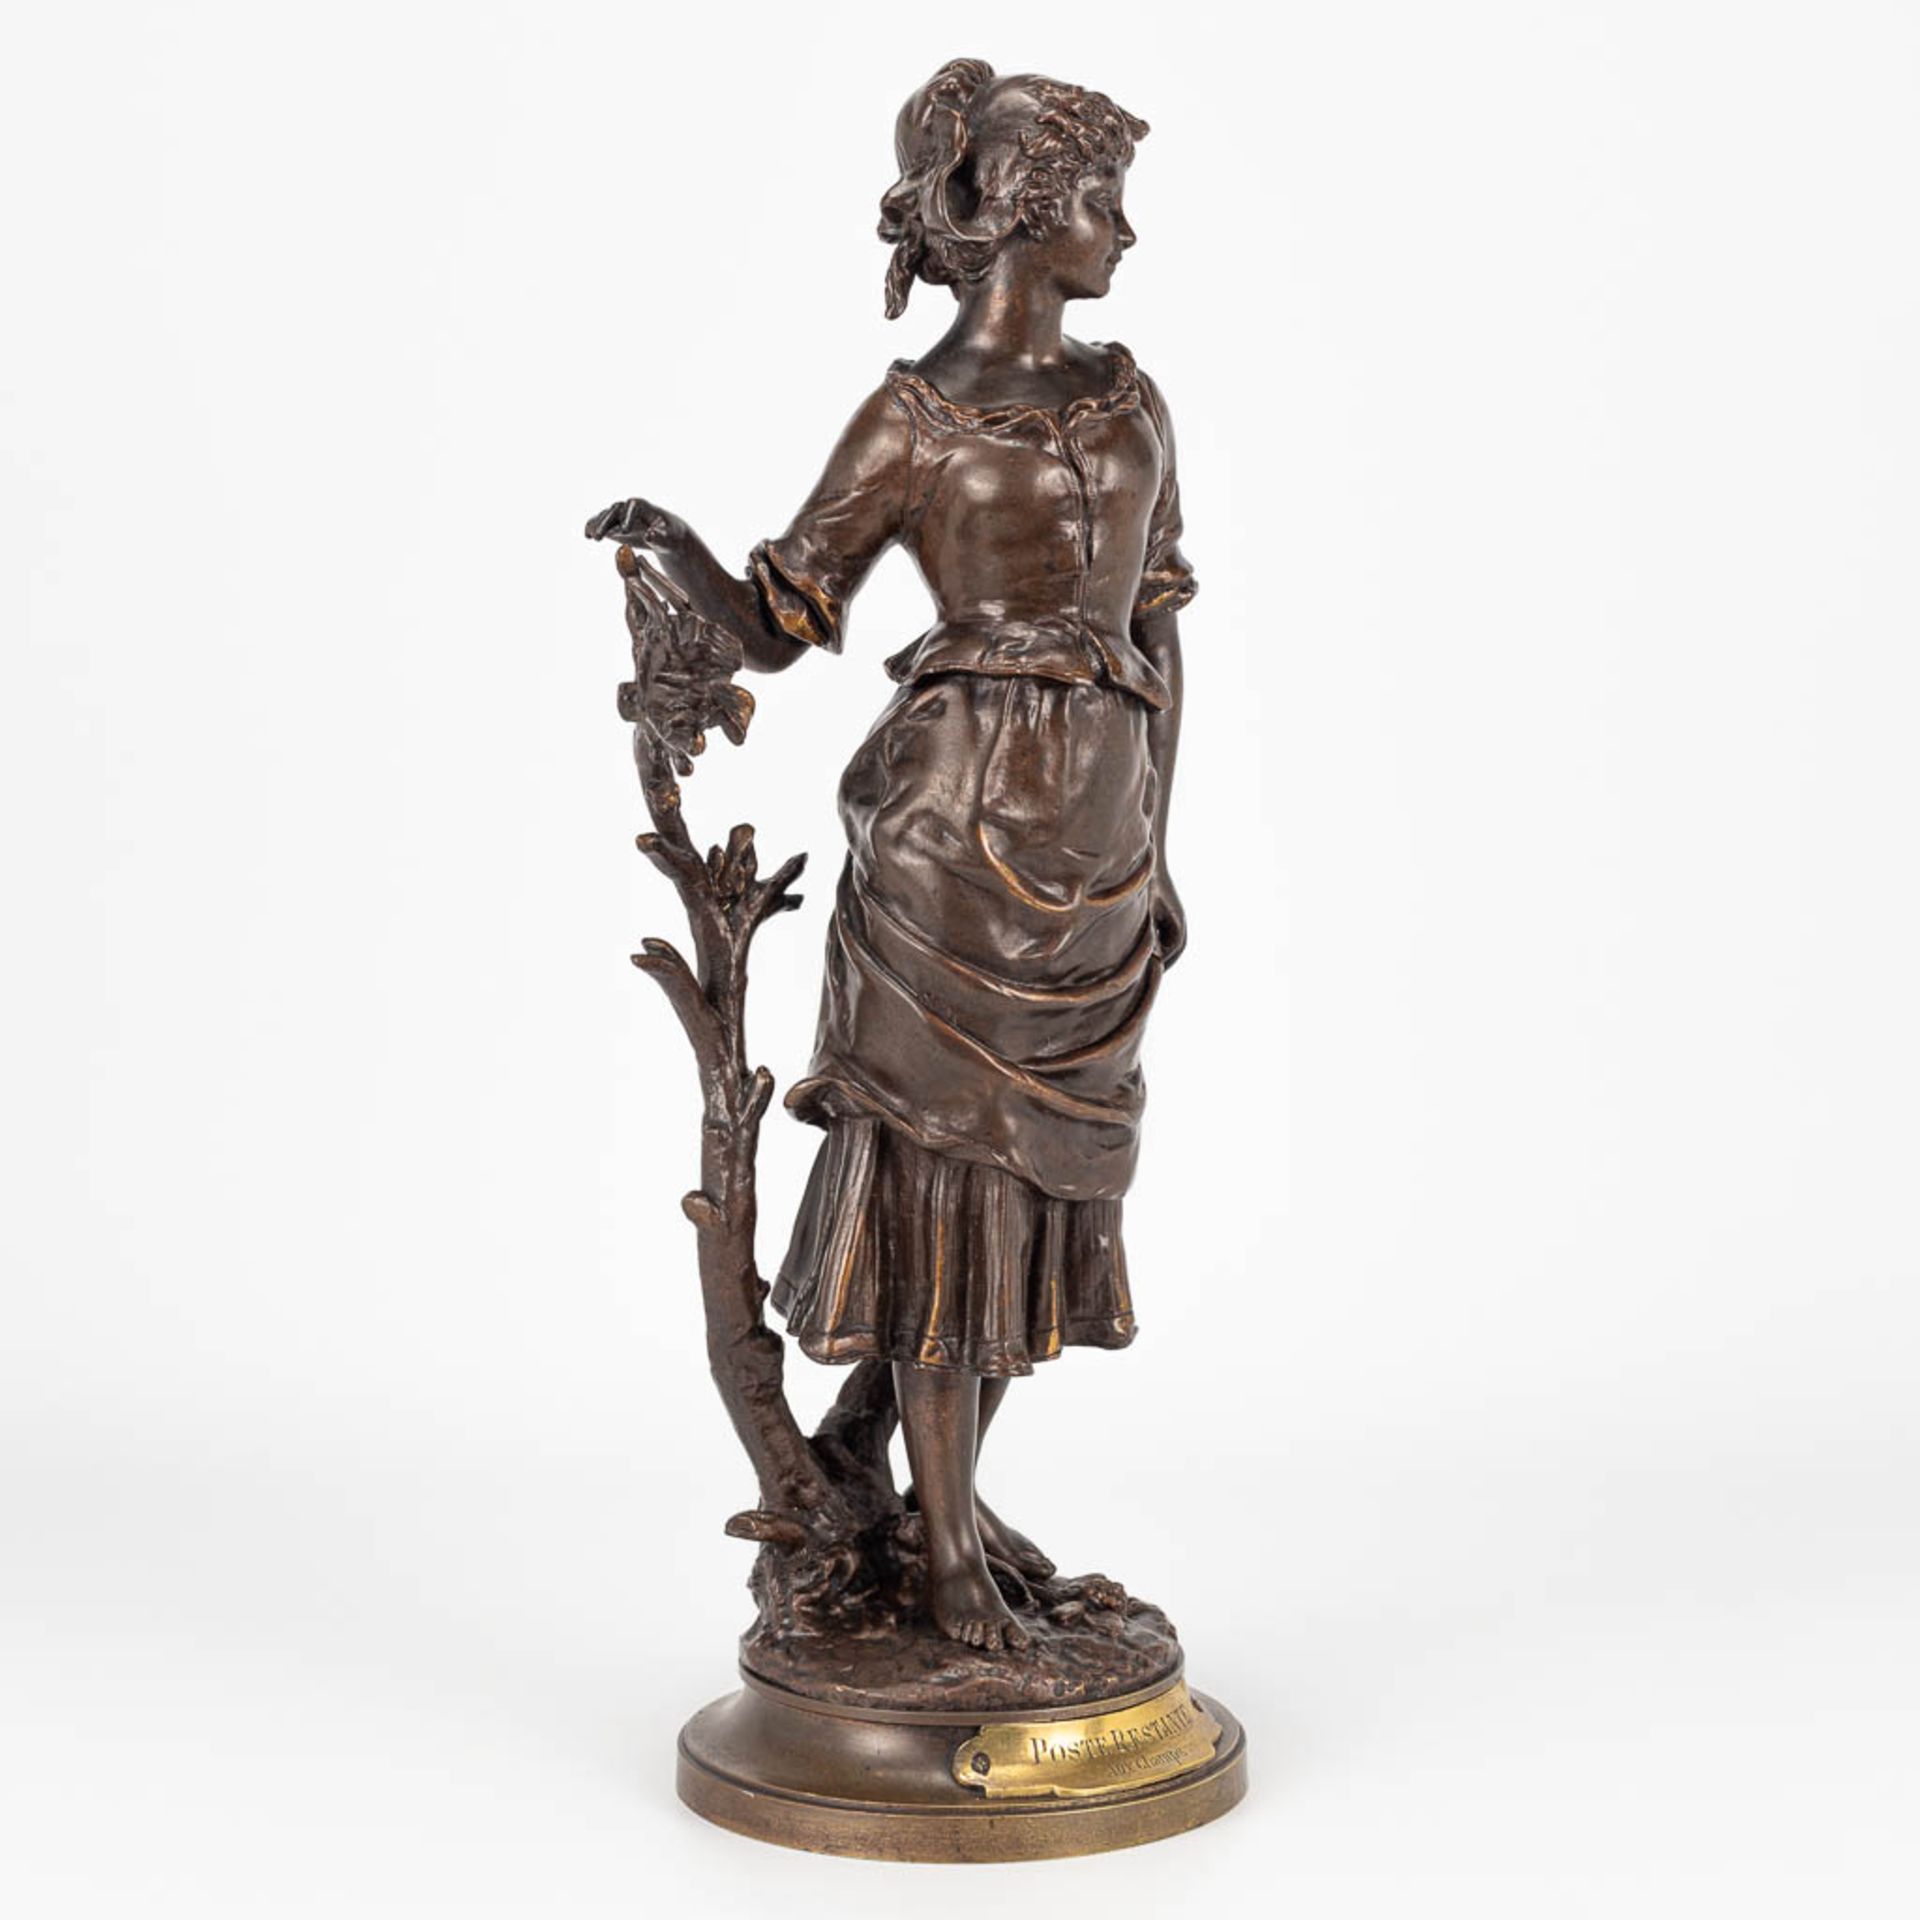 Charles ANFRIE (1833-1905) 'Poste Restante aux champs' a bronze statue of a young lady. - Image 5 of 12